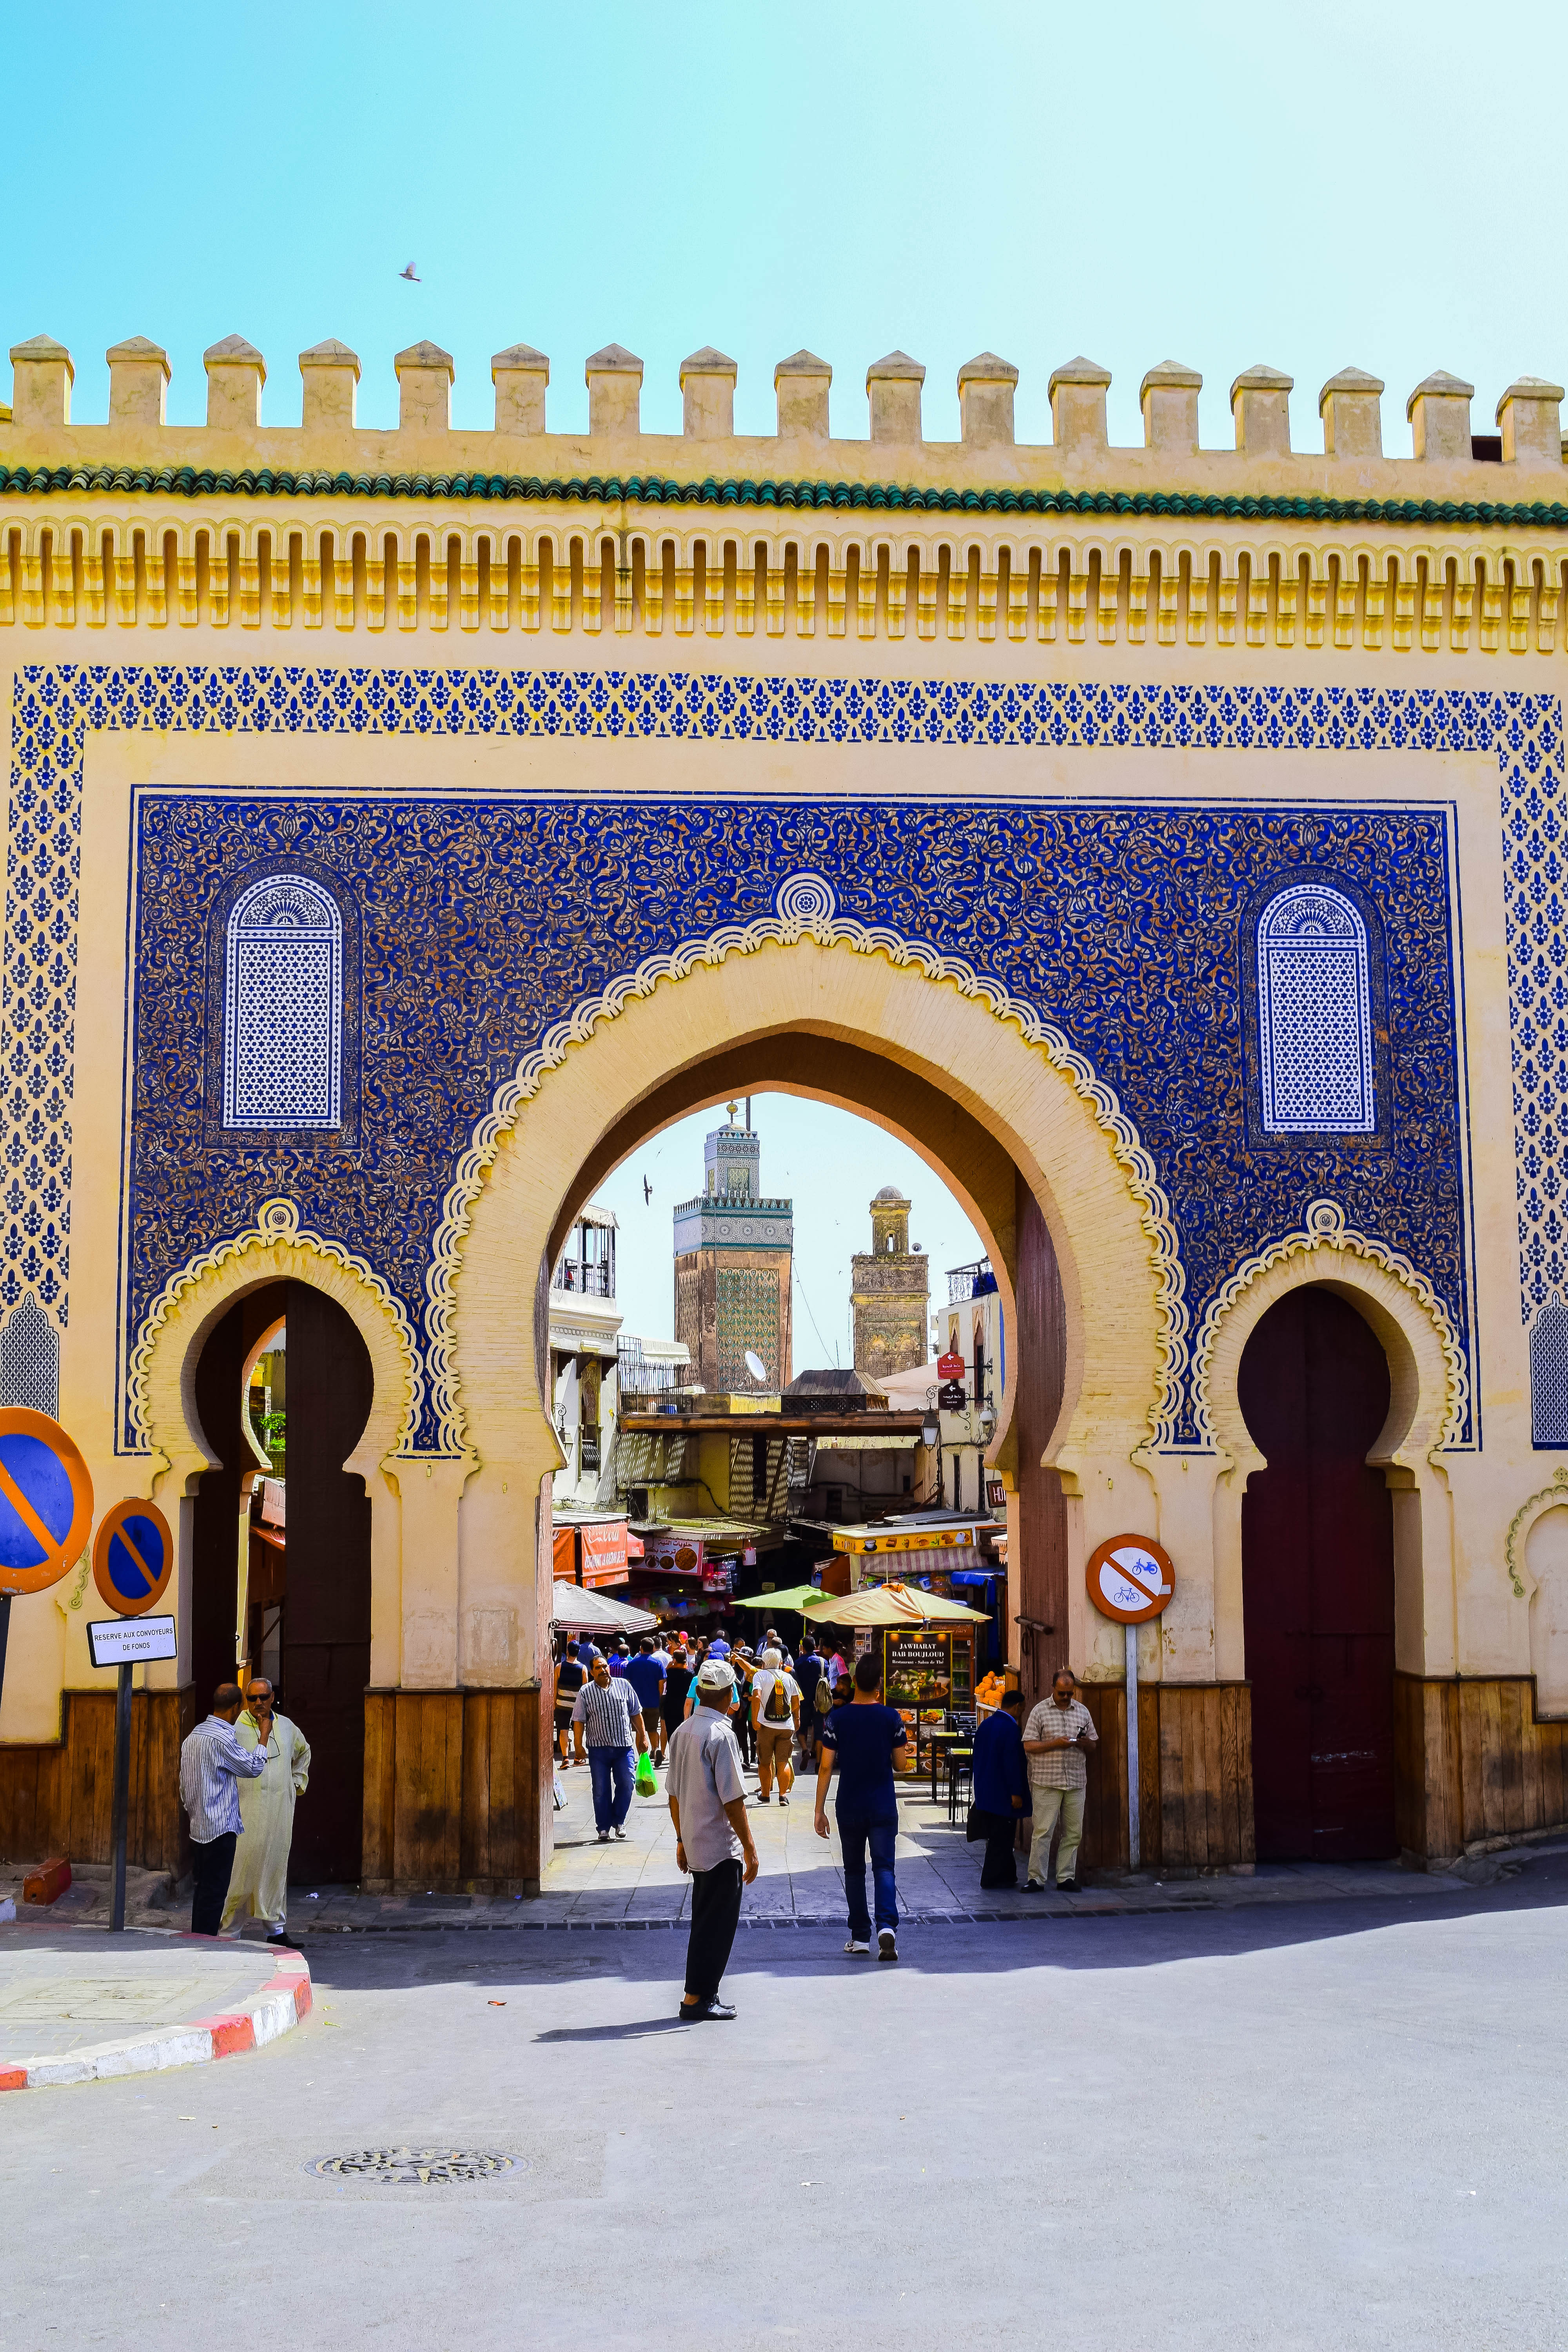 Fez Fes Medina Morocco_Travel Guide_What to do and see_walk 11 Unique Things to Do in Fes, Morocco for First-Timers